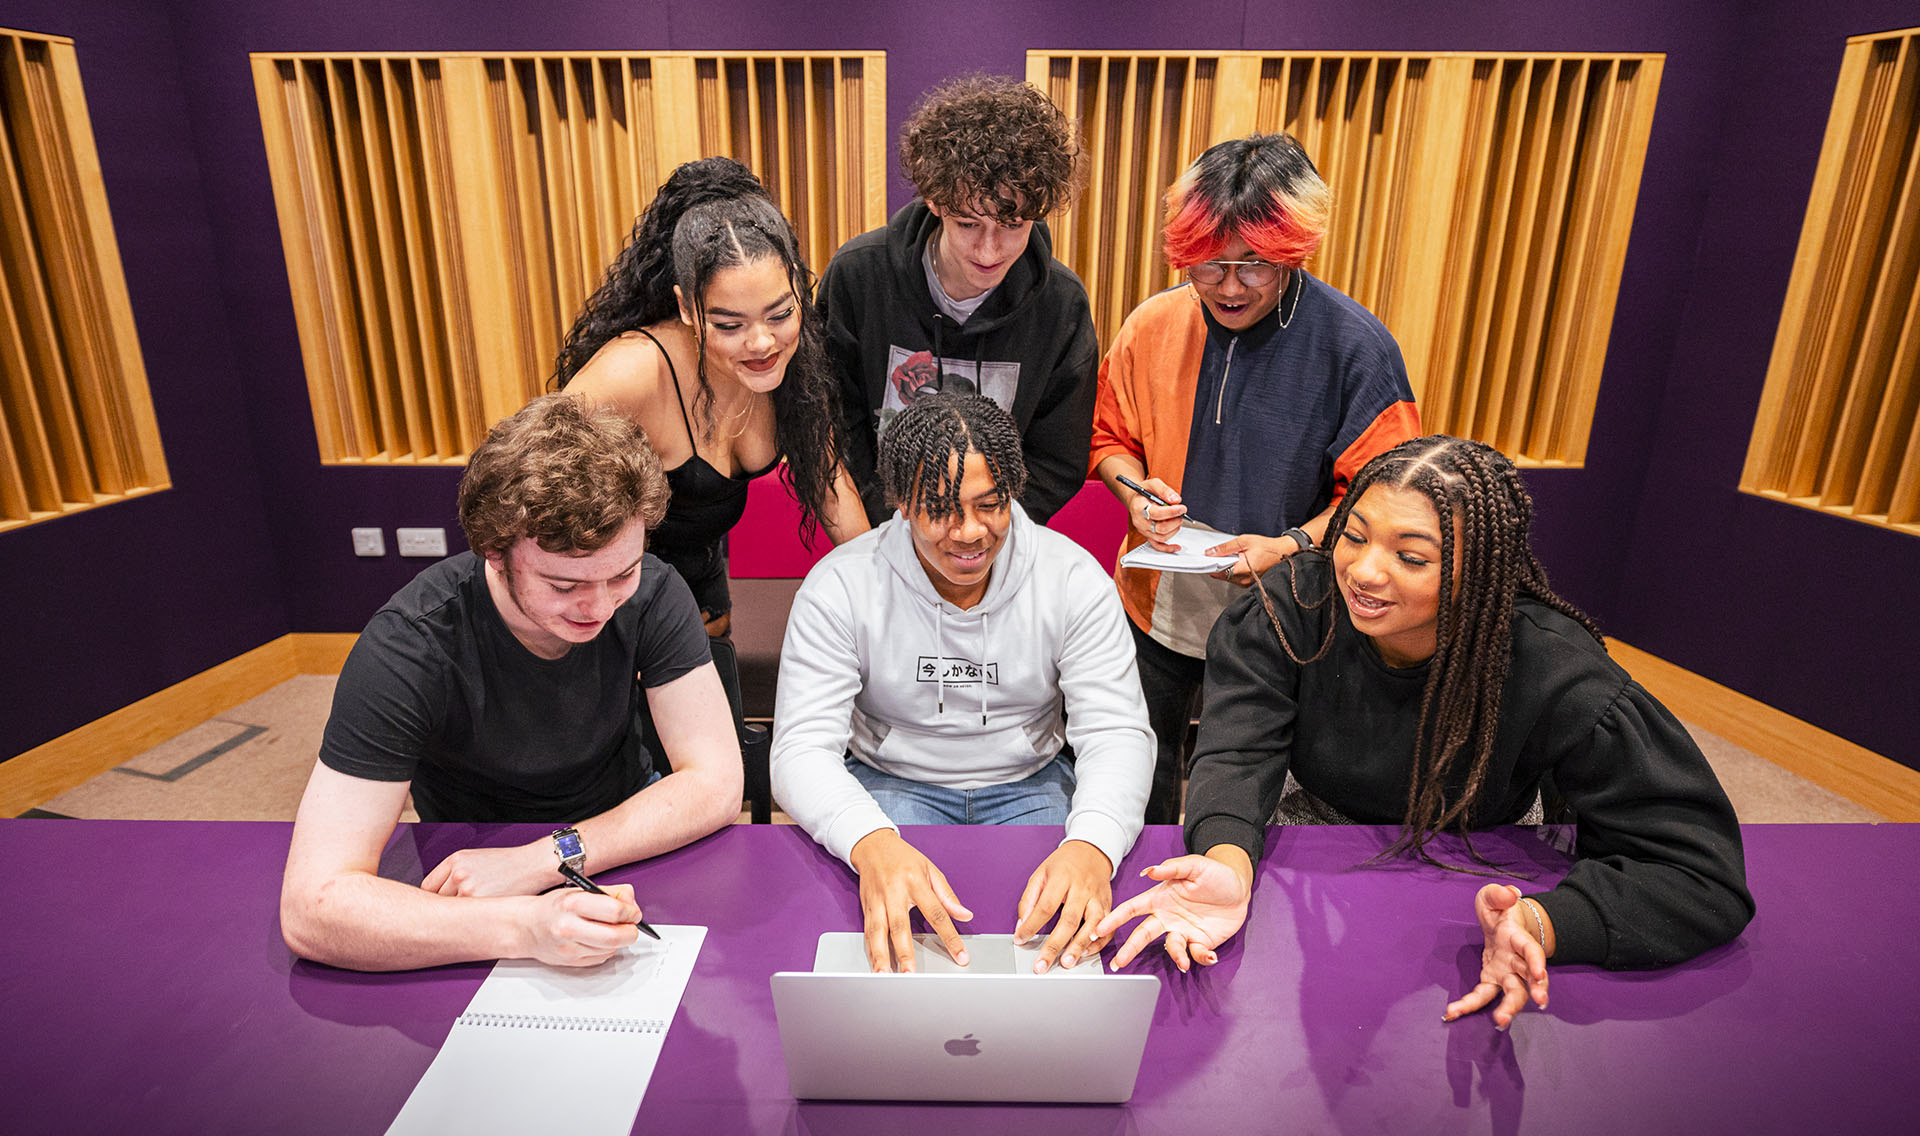 Music Business students-working at a table in a music studio